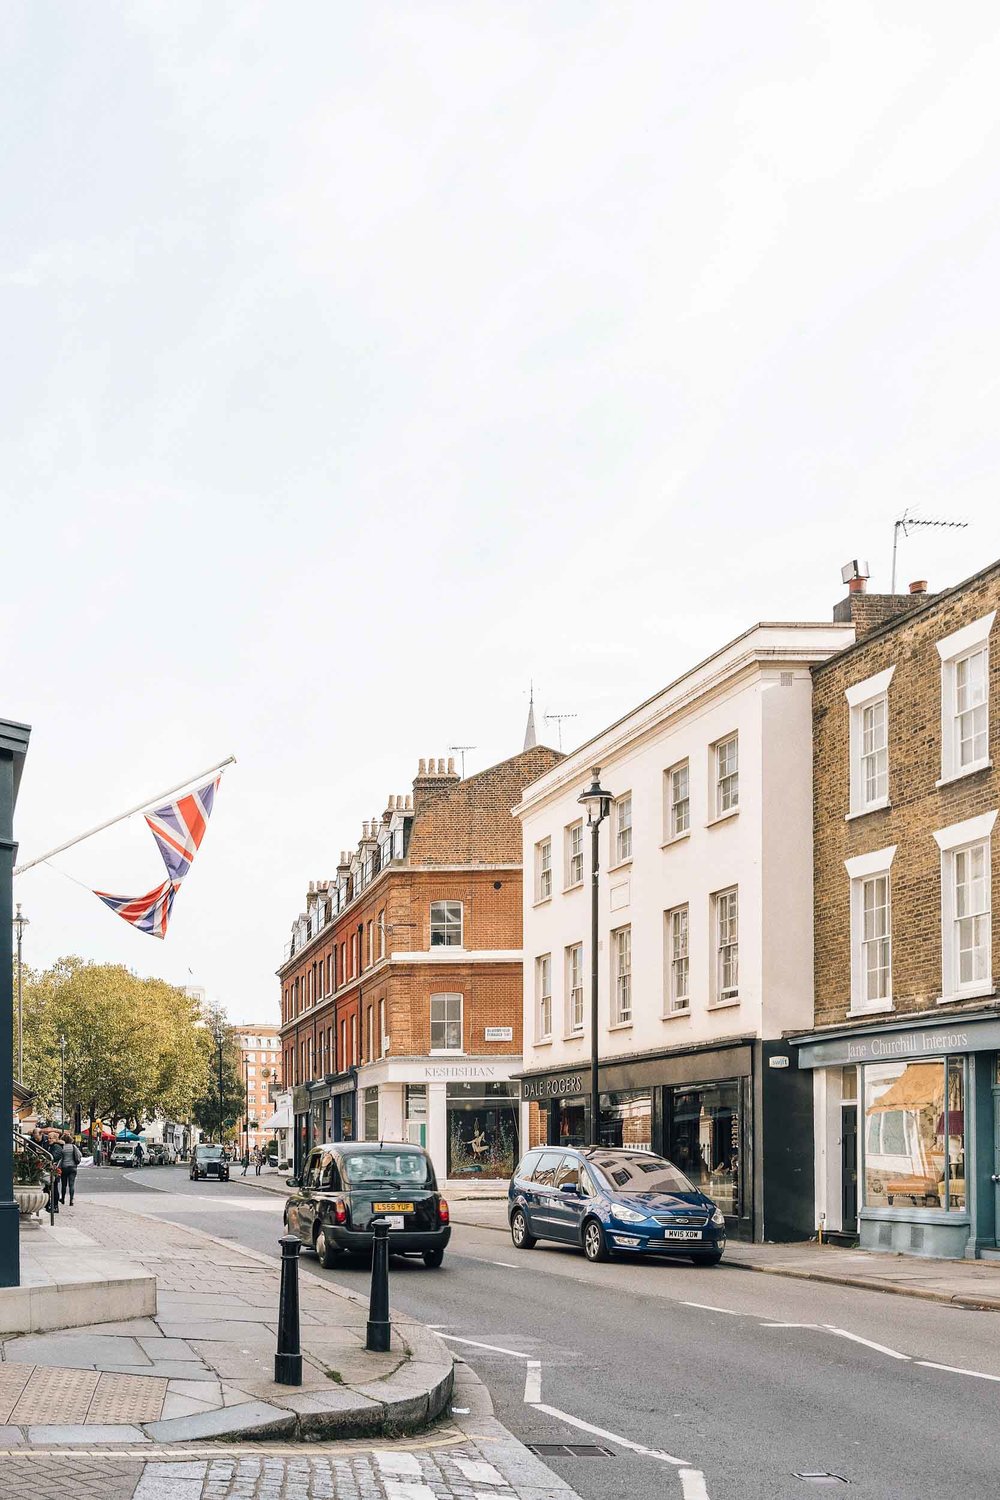 What to see in London in 2 days: the neighborhood of Chelsea